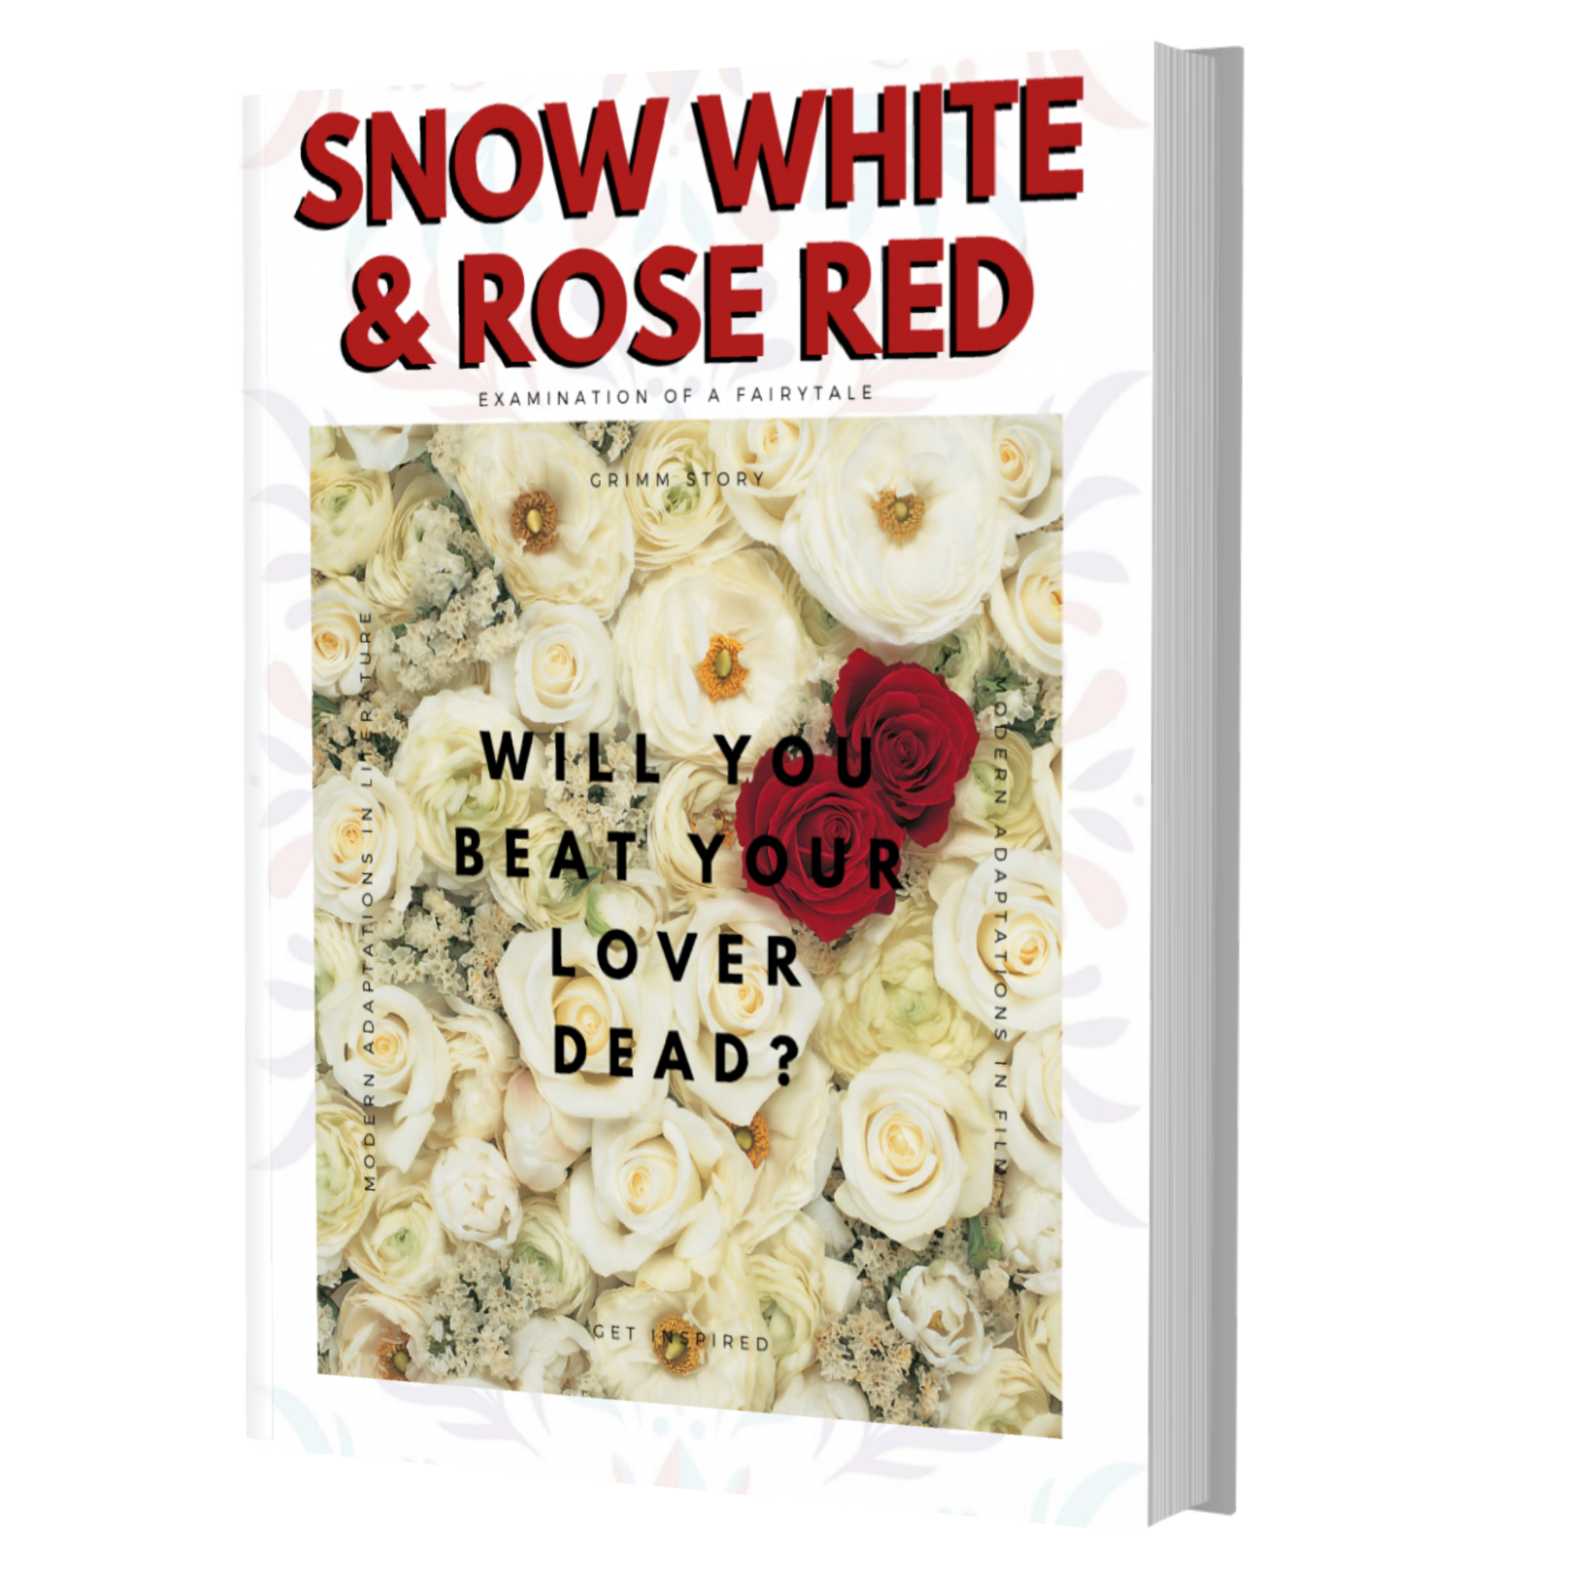 A mock book cover for the Snow White and Rose Red examinations of a fairytale ebook